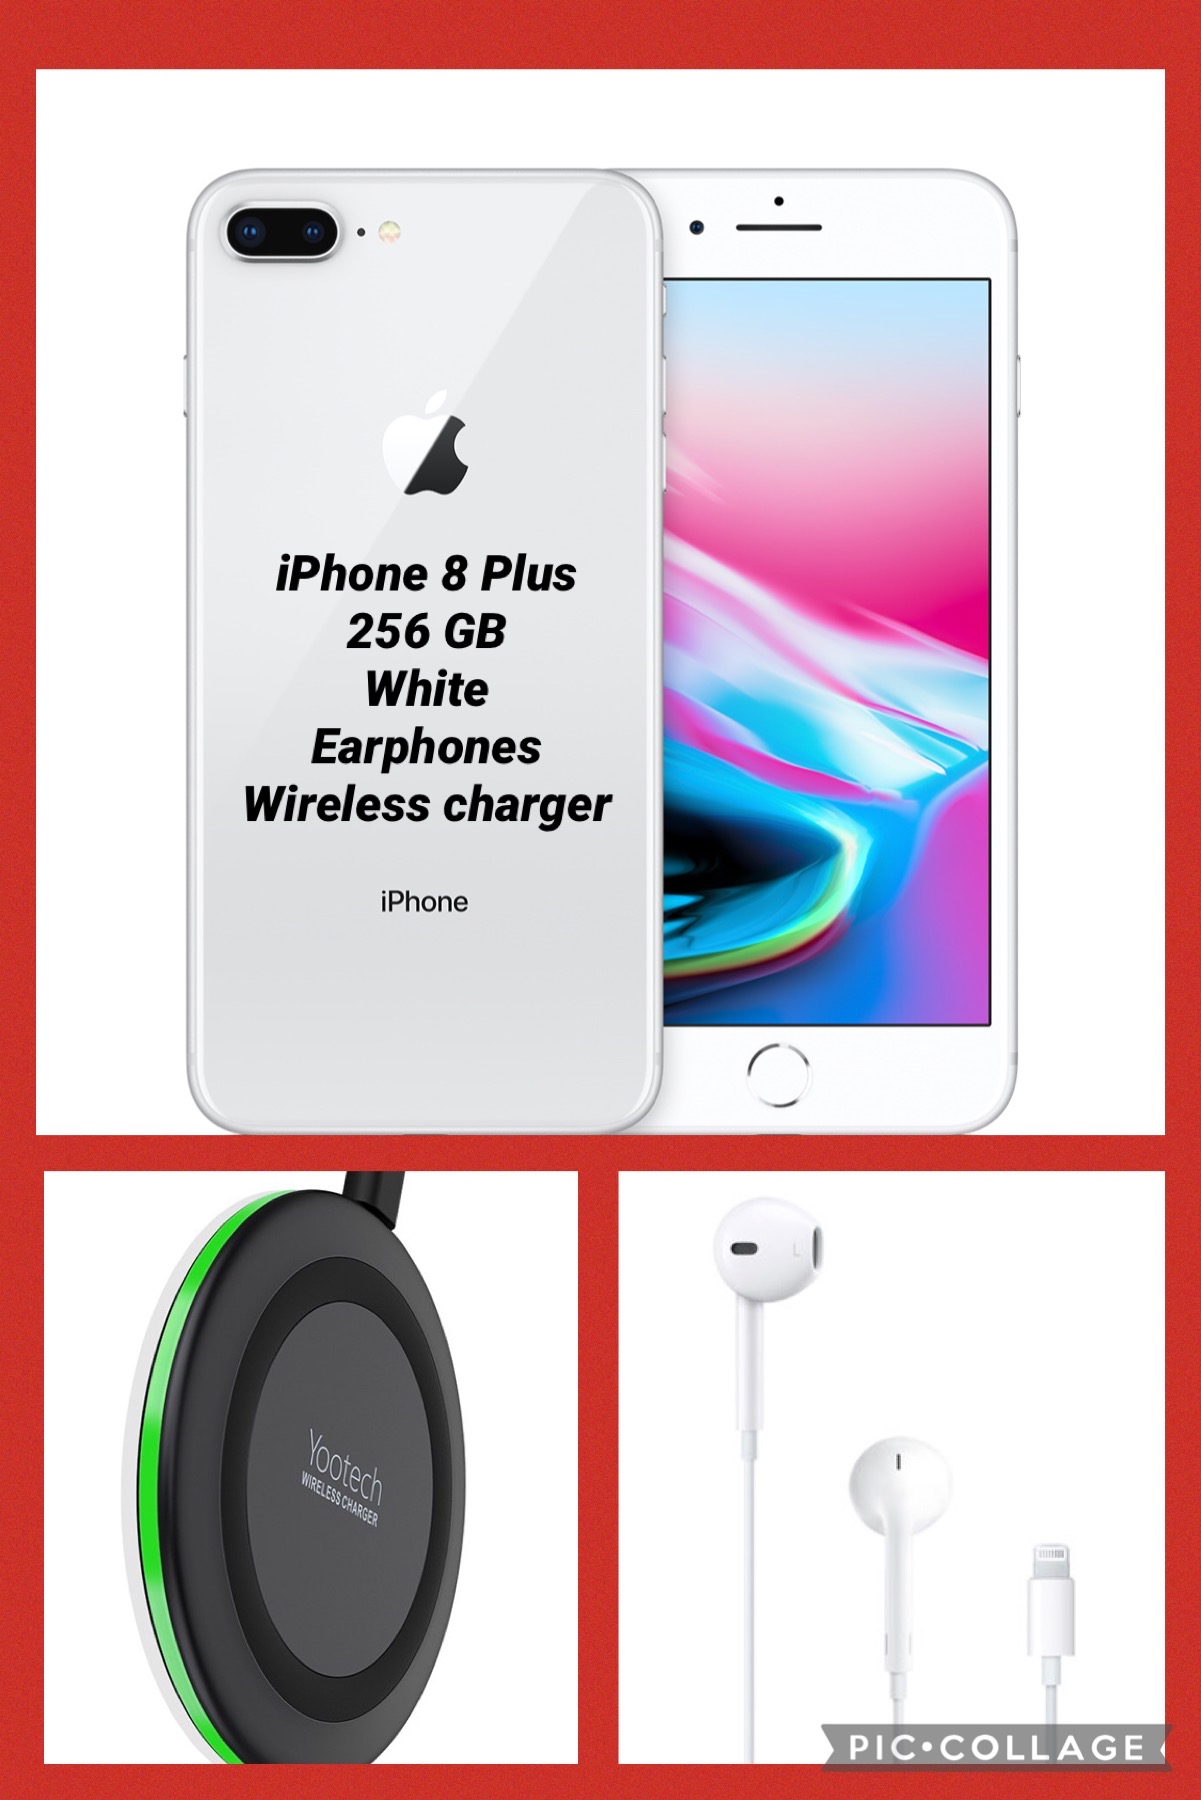 iPhone 8 Plus white 256gb comes with earphones and wireless charger 